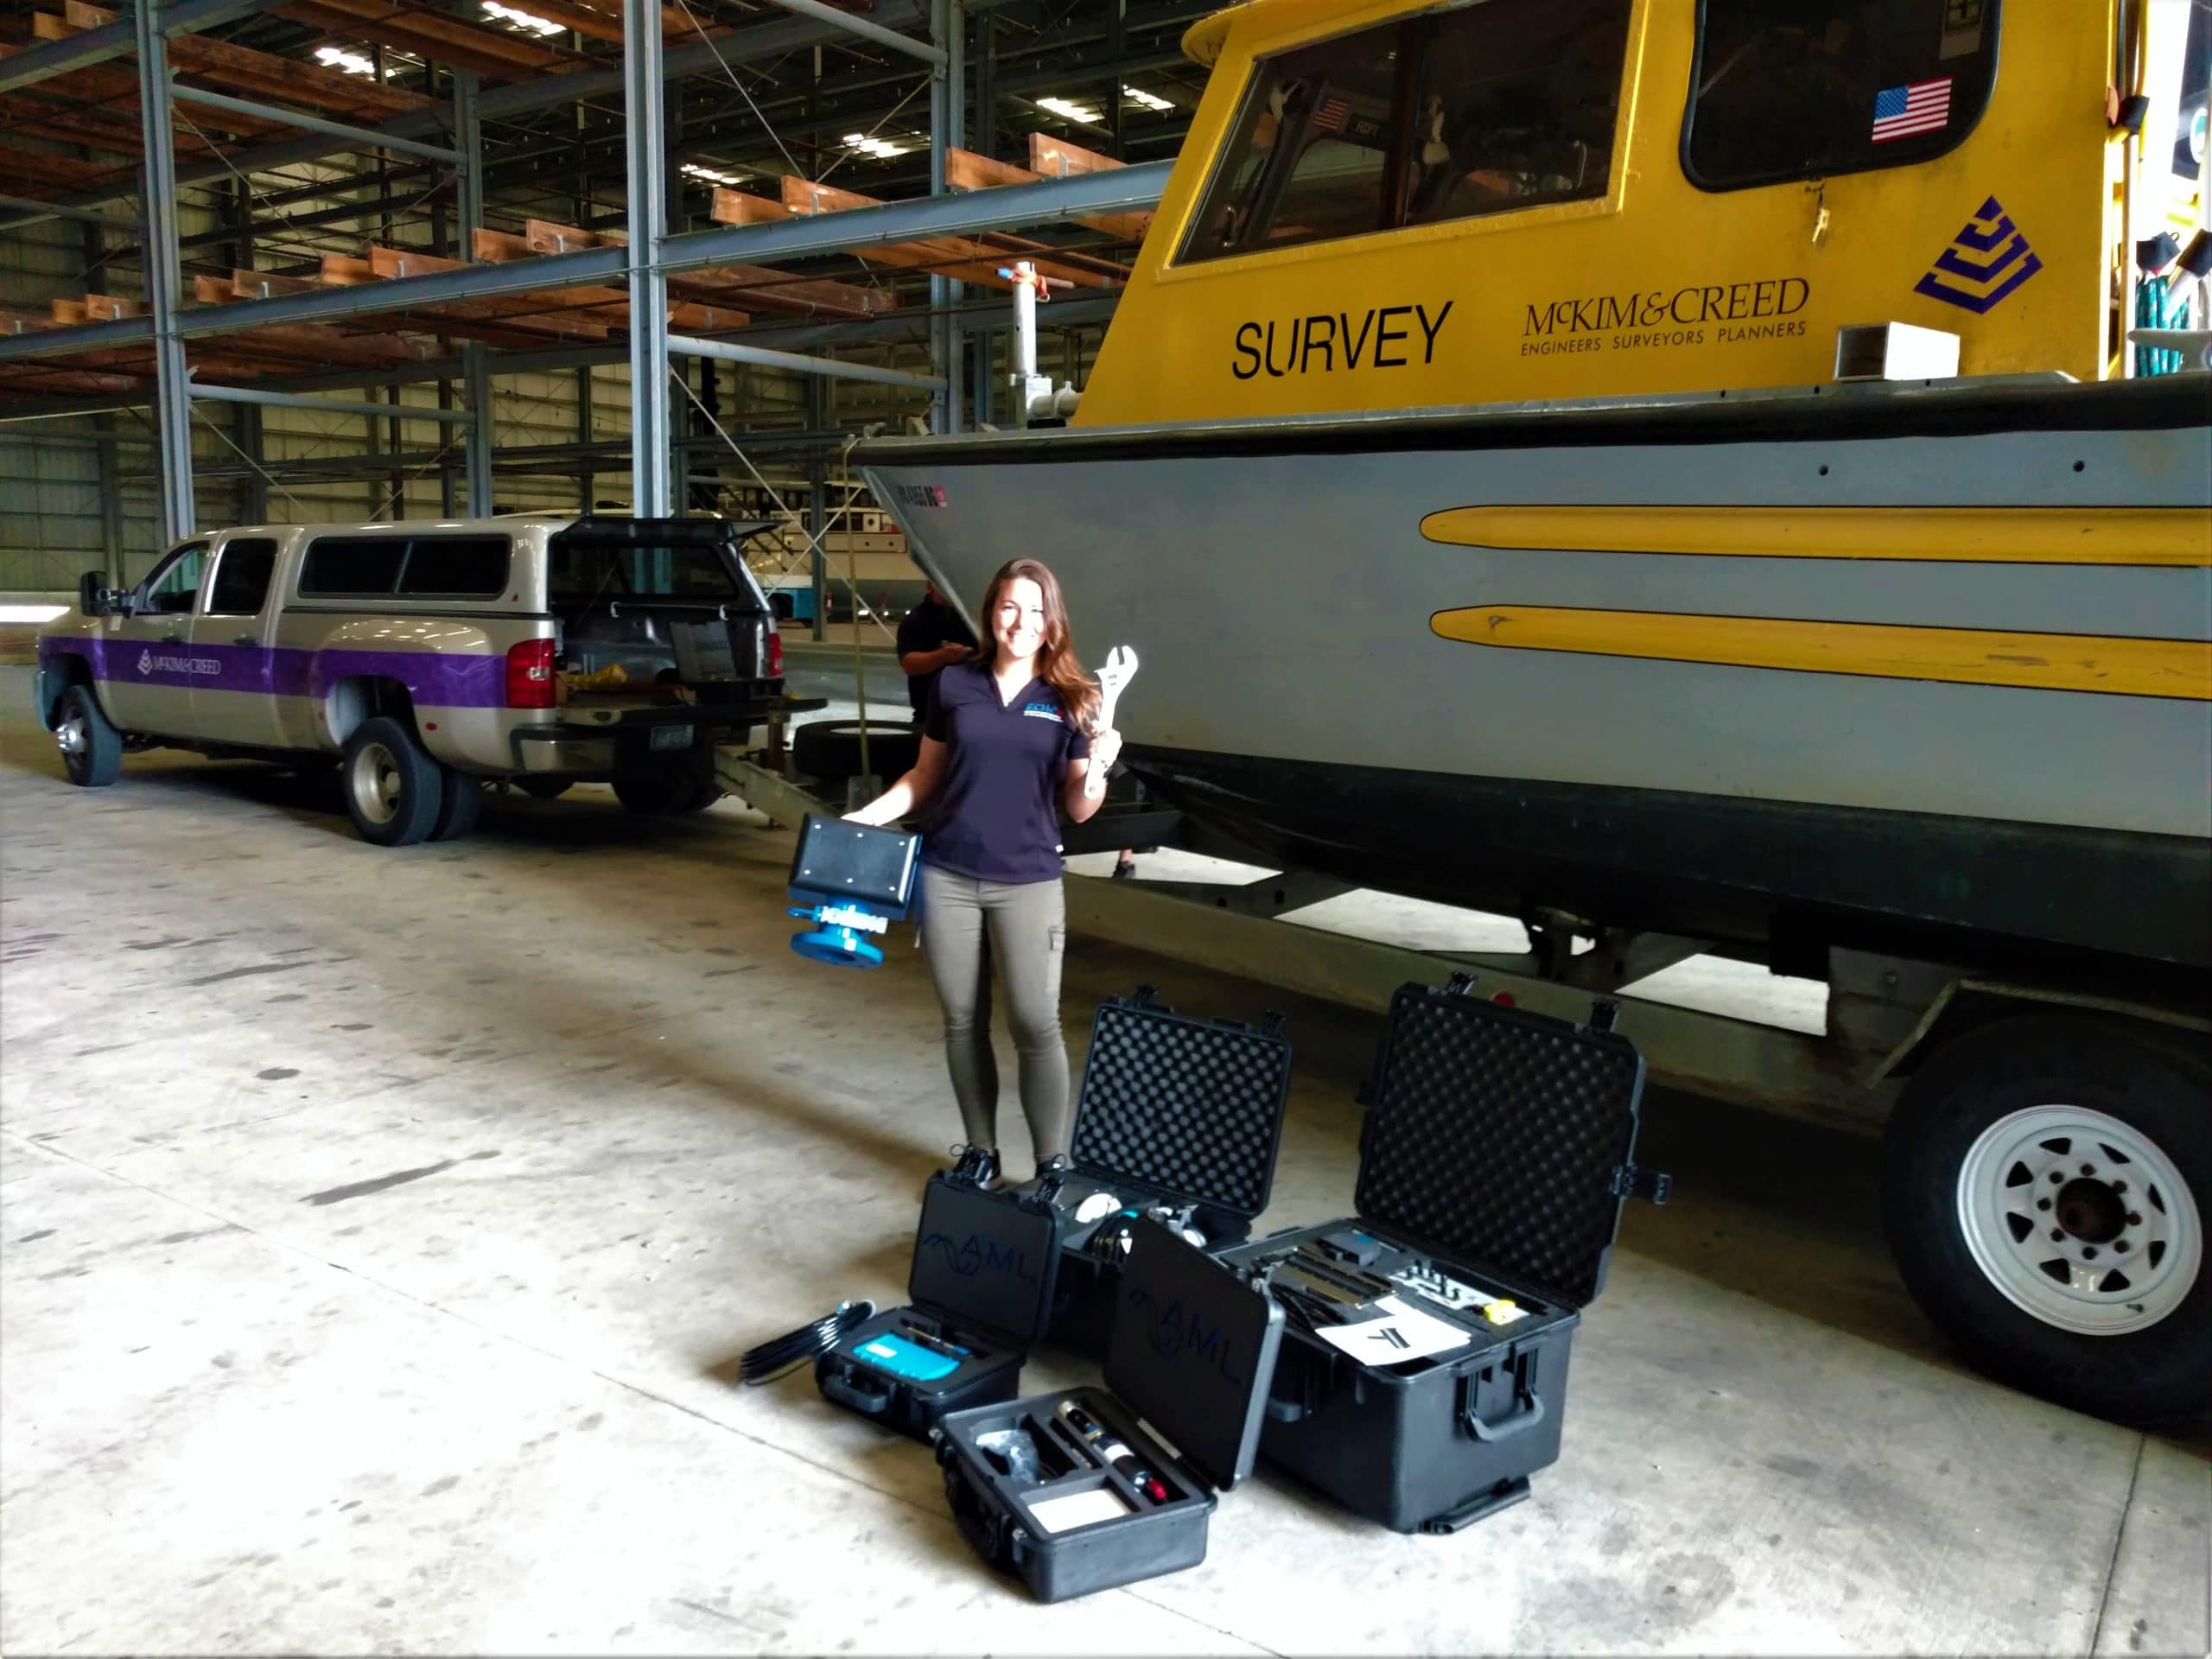 female surveyor standing next to MBES equipment and boat on a tow trailer